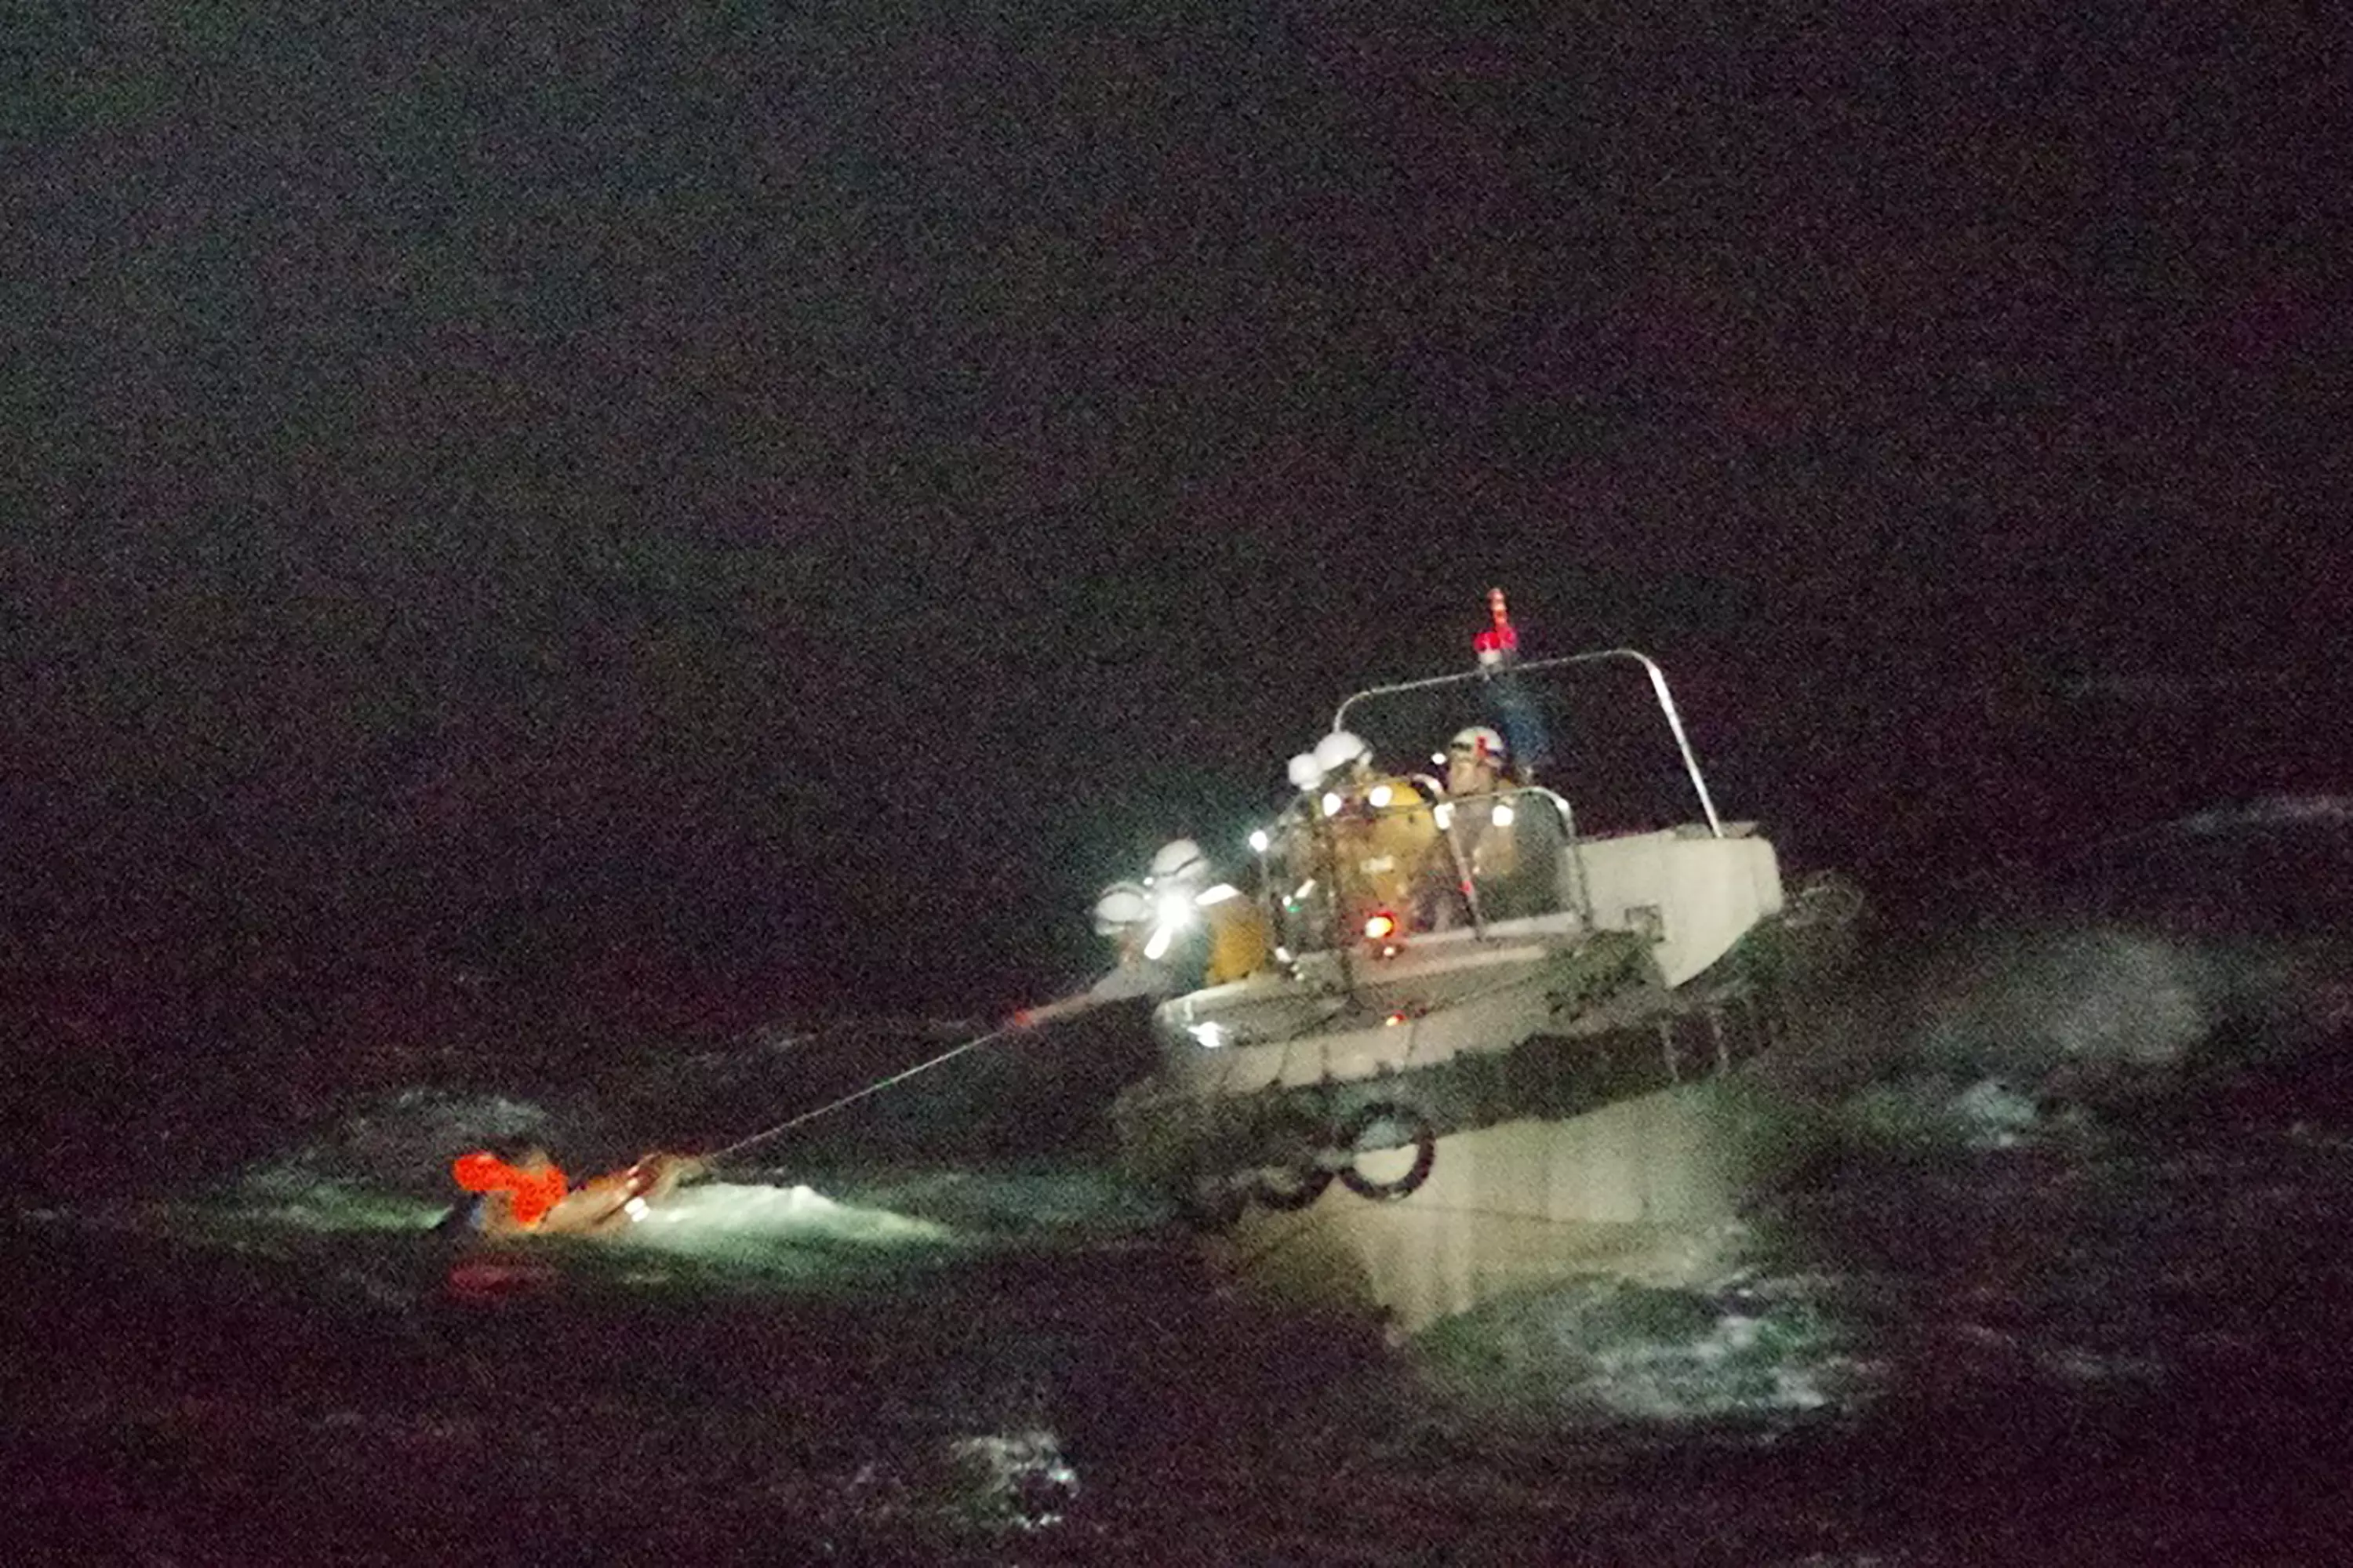 Japan's Coast Guard rescued a Filipino crew member on September 2.